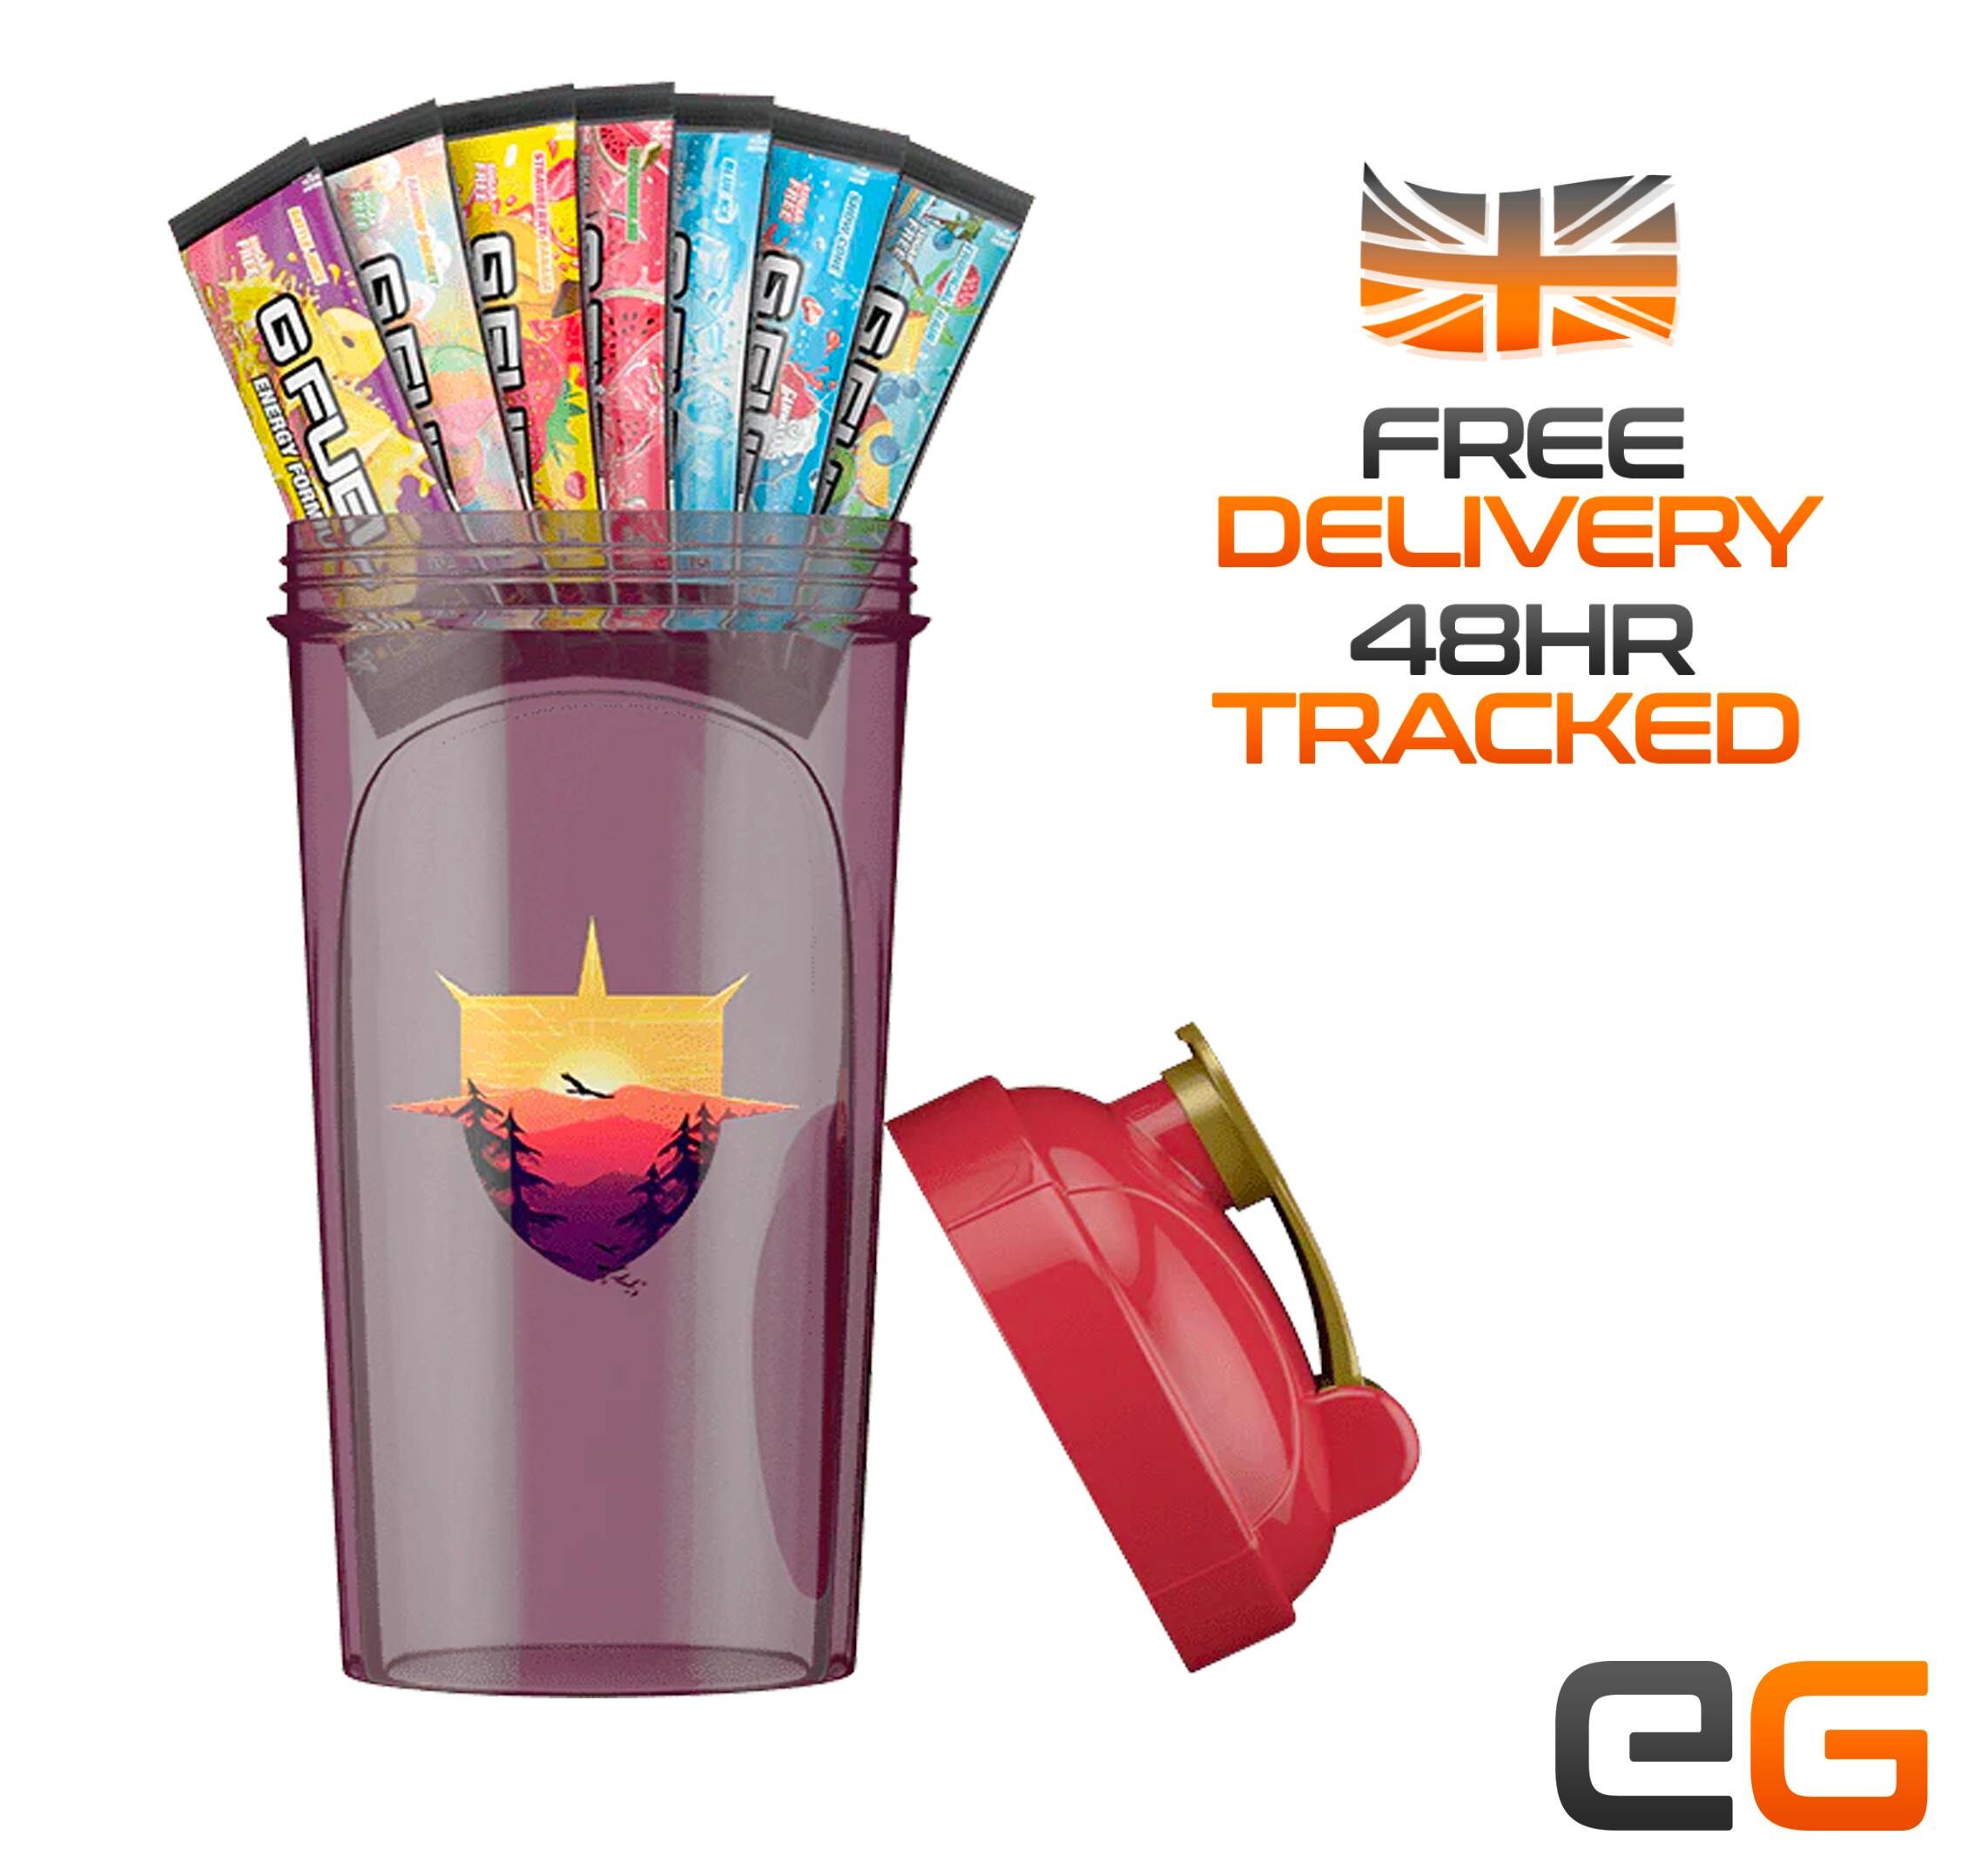 G Fuel Shaker Cups, Choose Your Own, 473ml Or 710ml, UK, GFUEL Energy